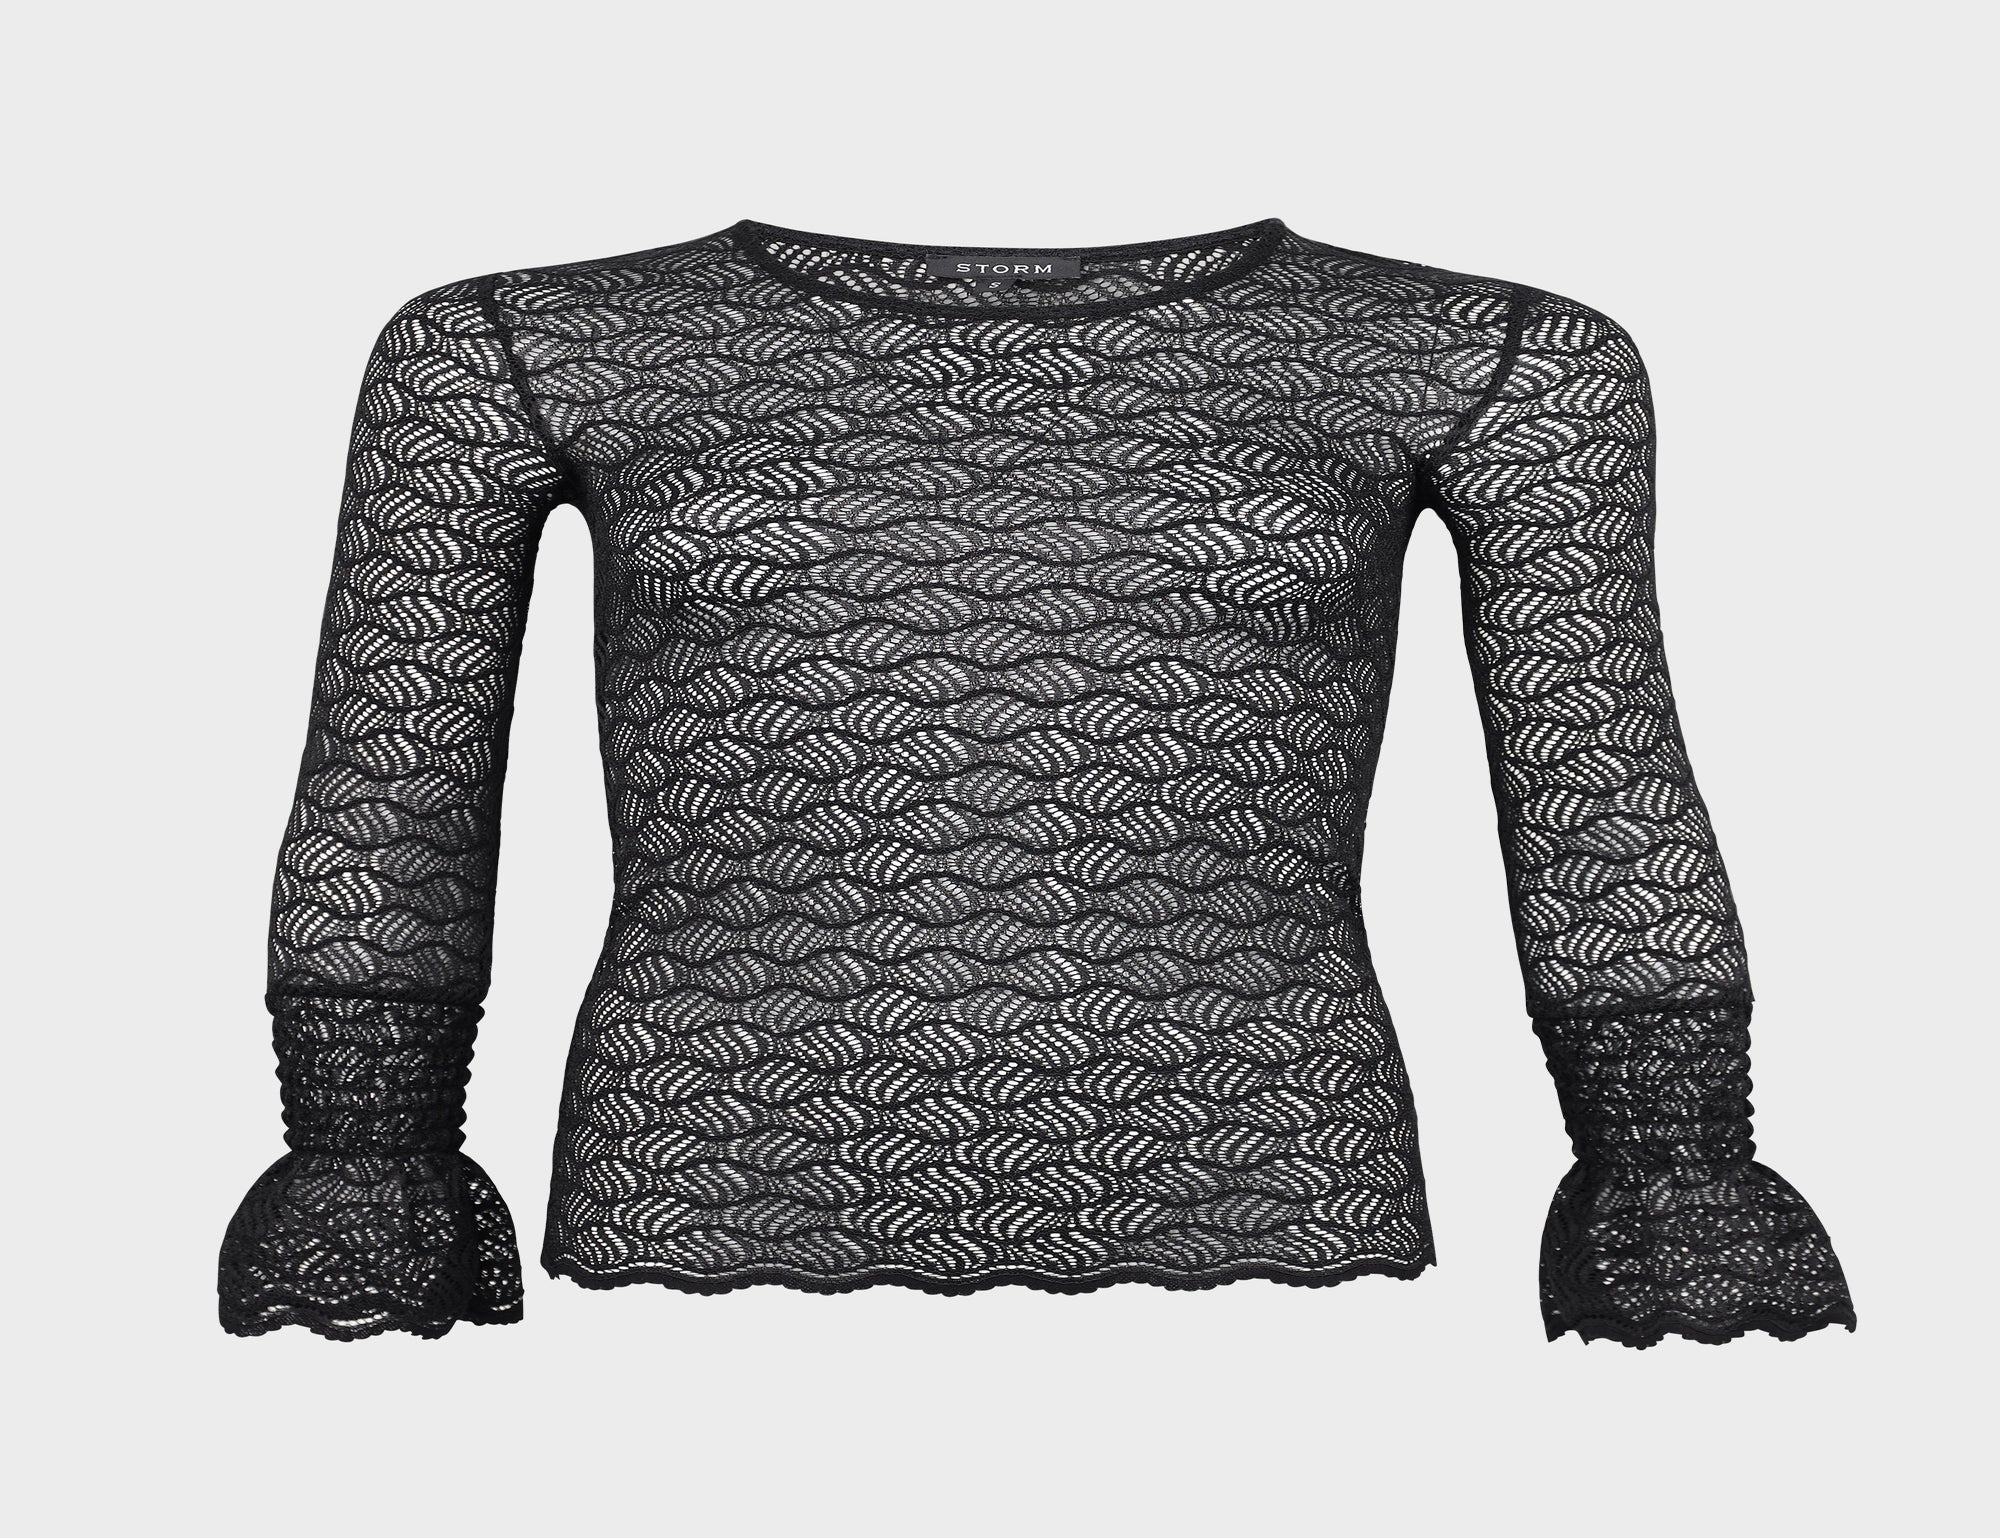 Ella Lace Layer Top - Black - Tops - Long Sleeve - Women's Clothing - Storm